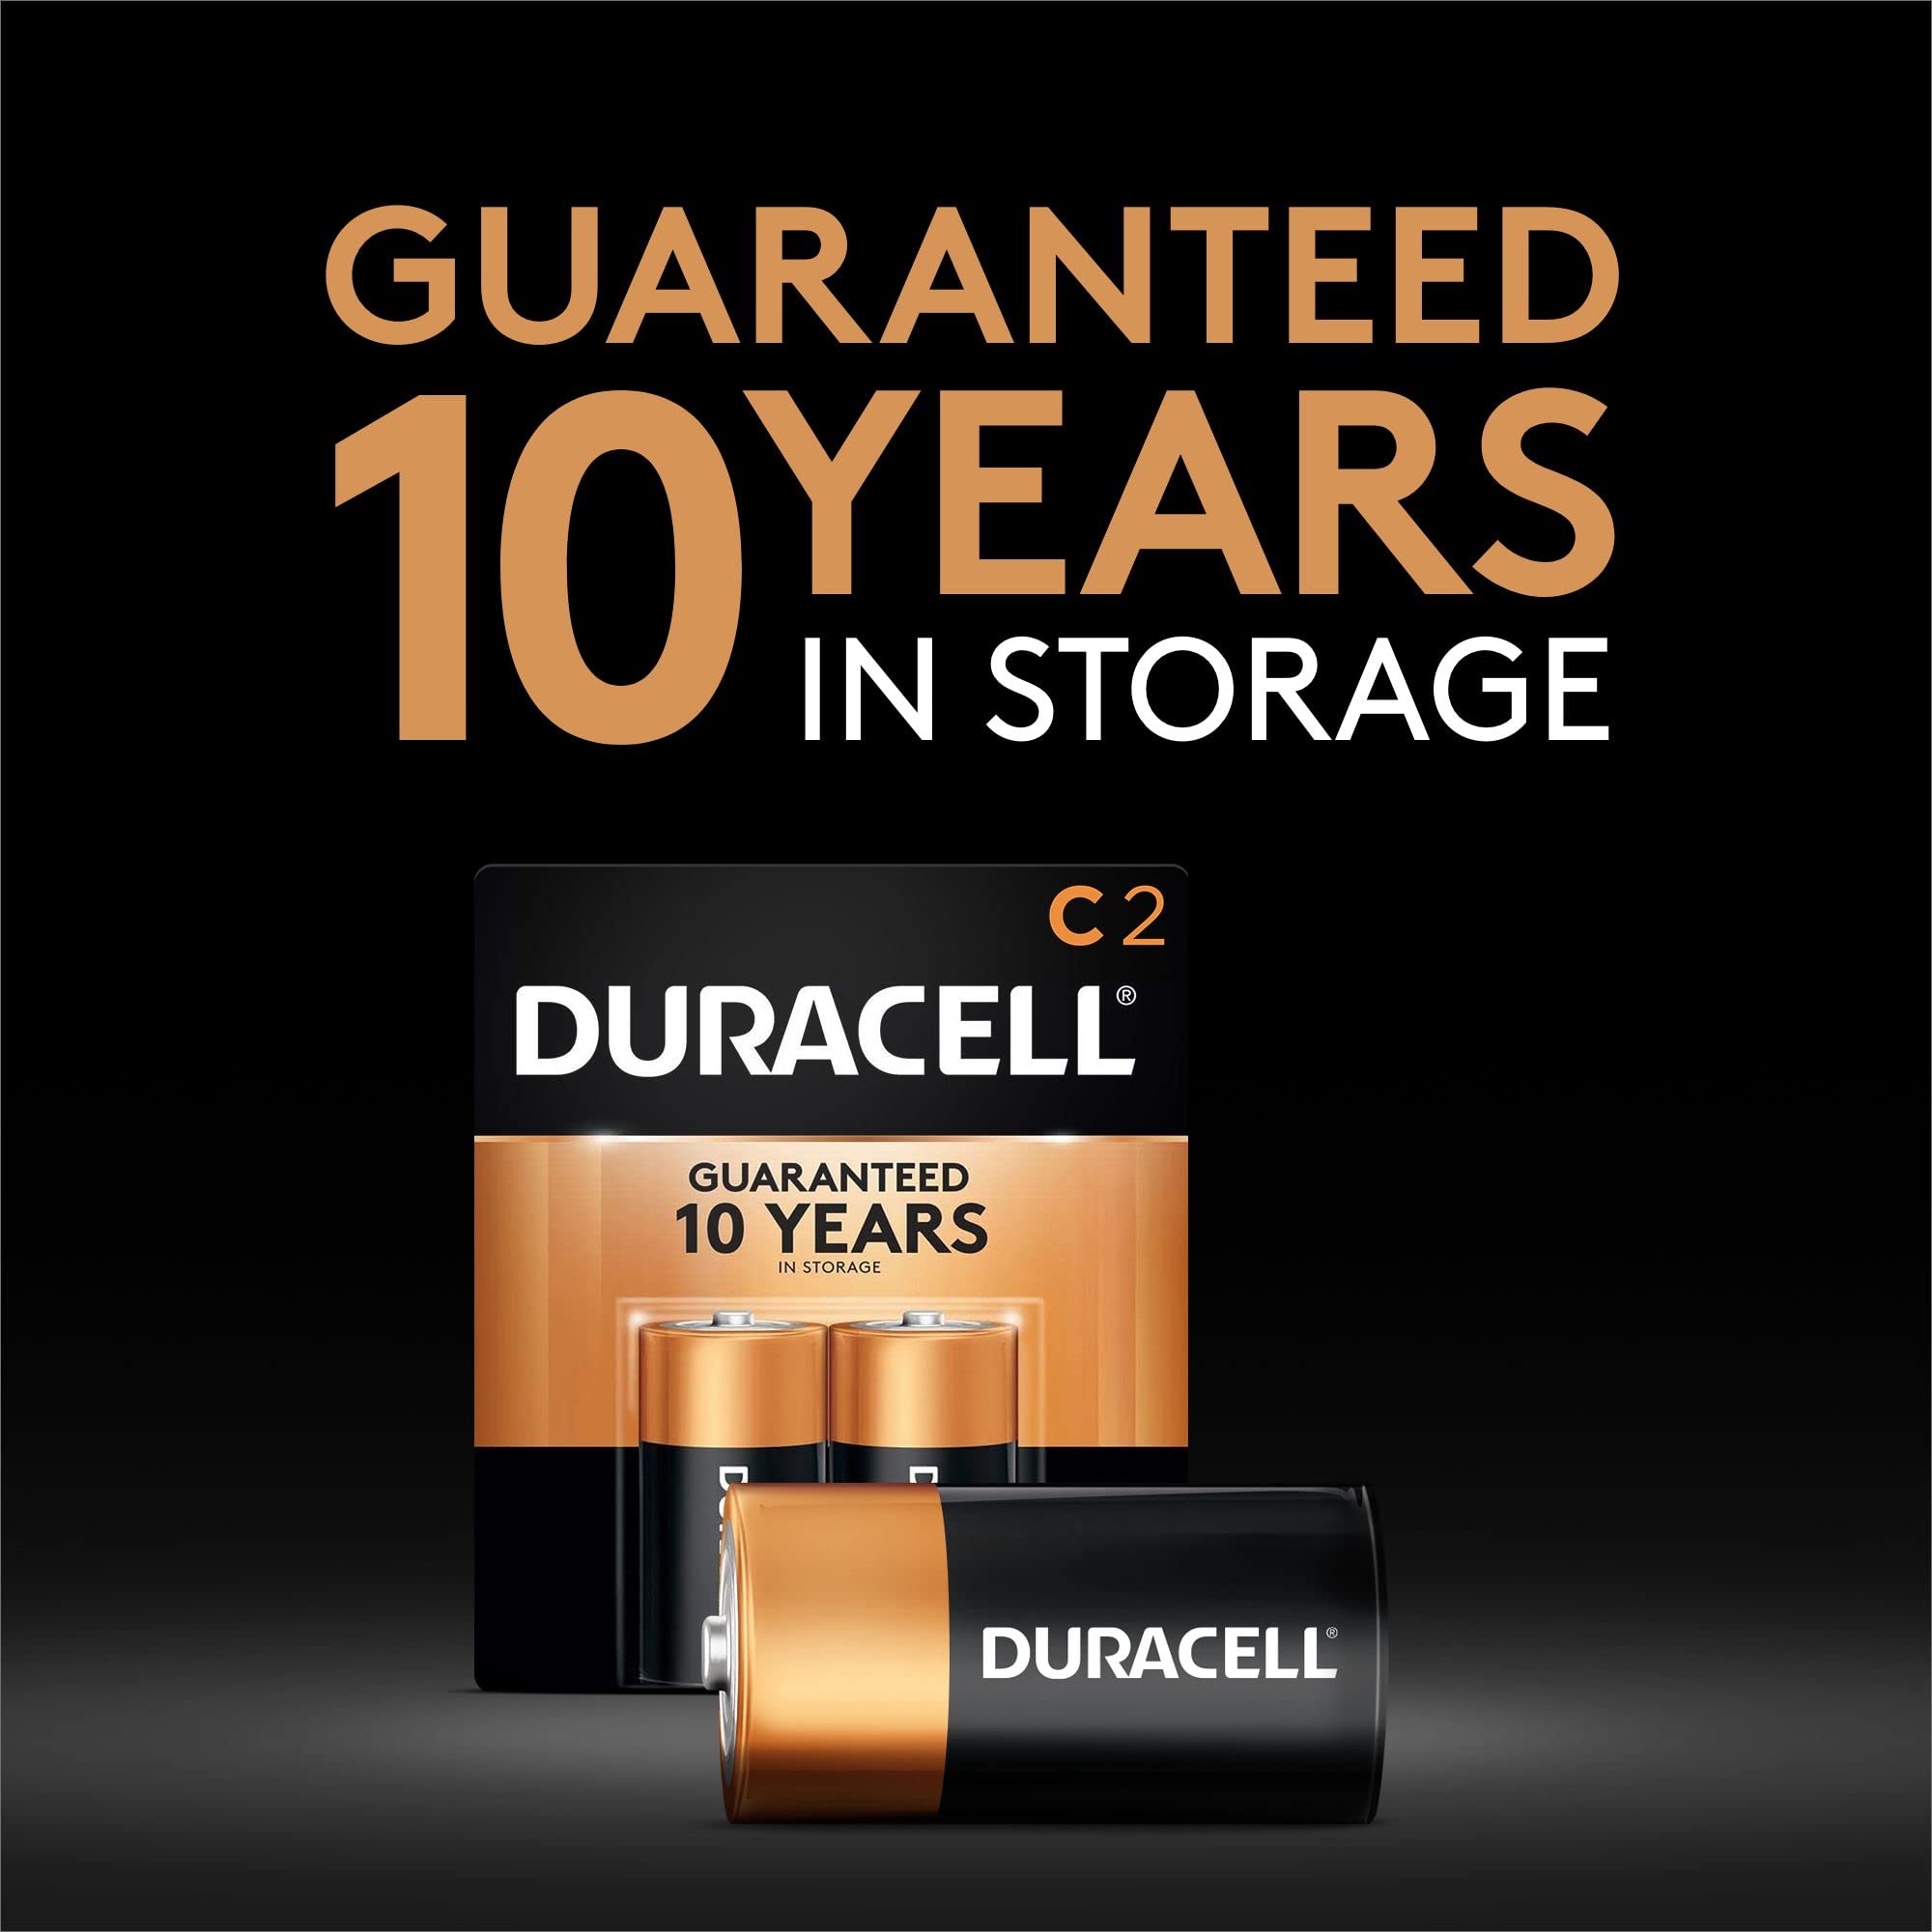 DURACELL Coppertop 1.5V Size C Alkaline Battery, (Pack of 48) - image 3 of 5